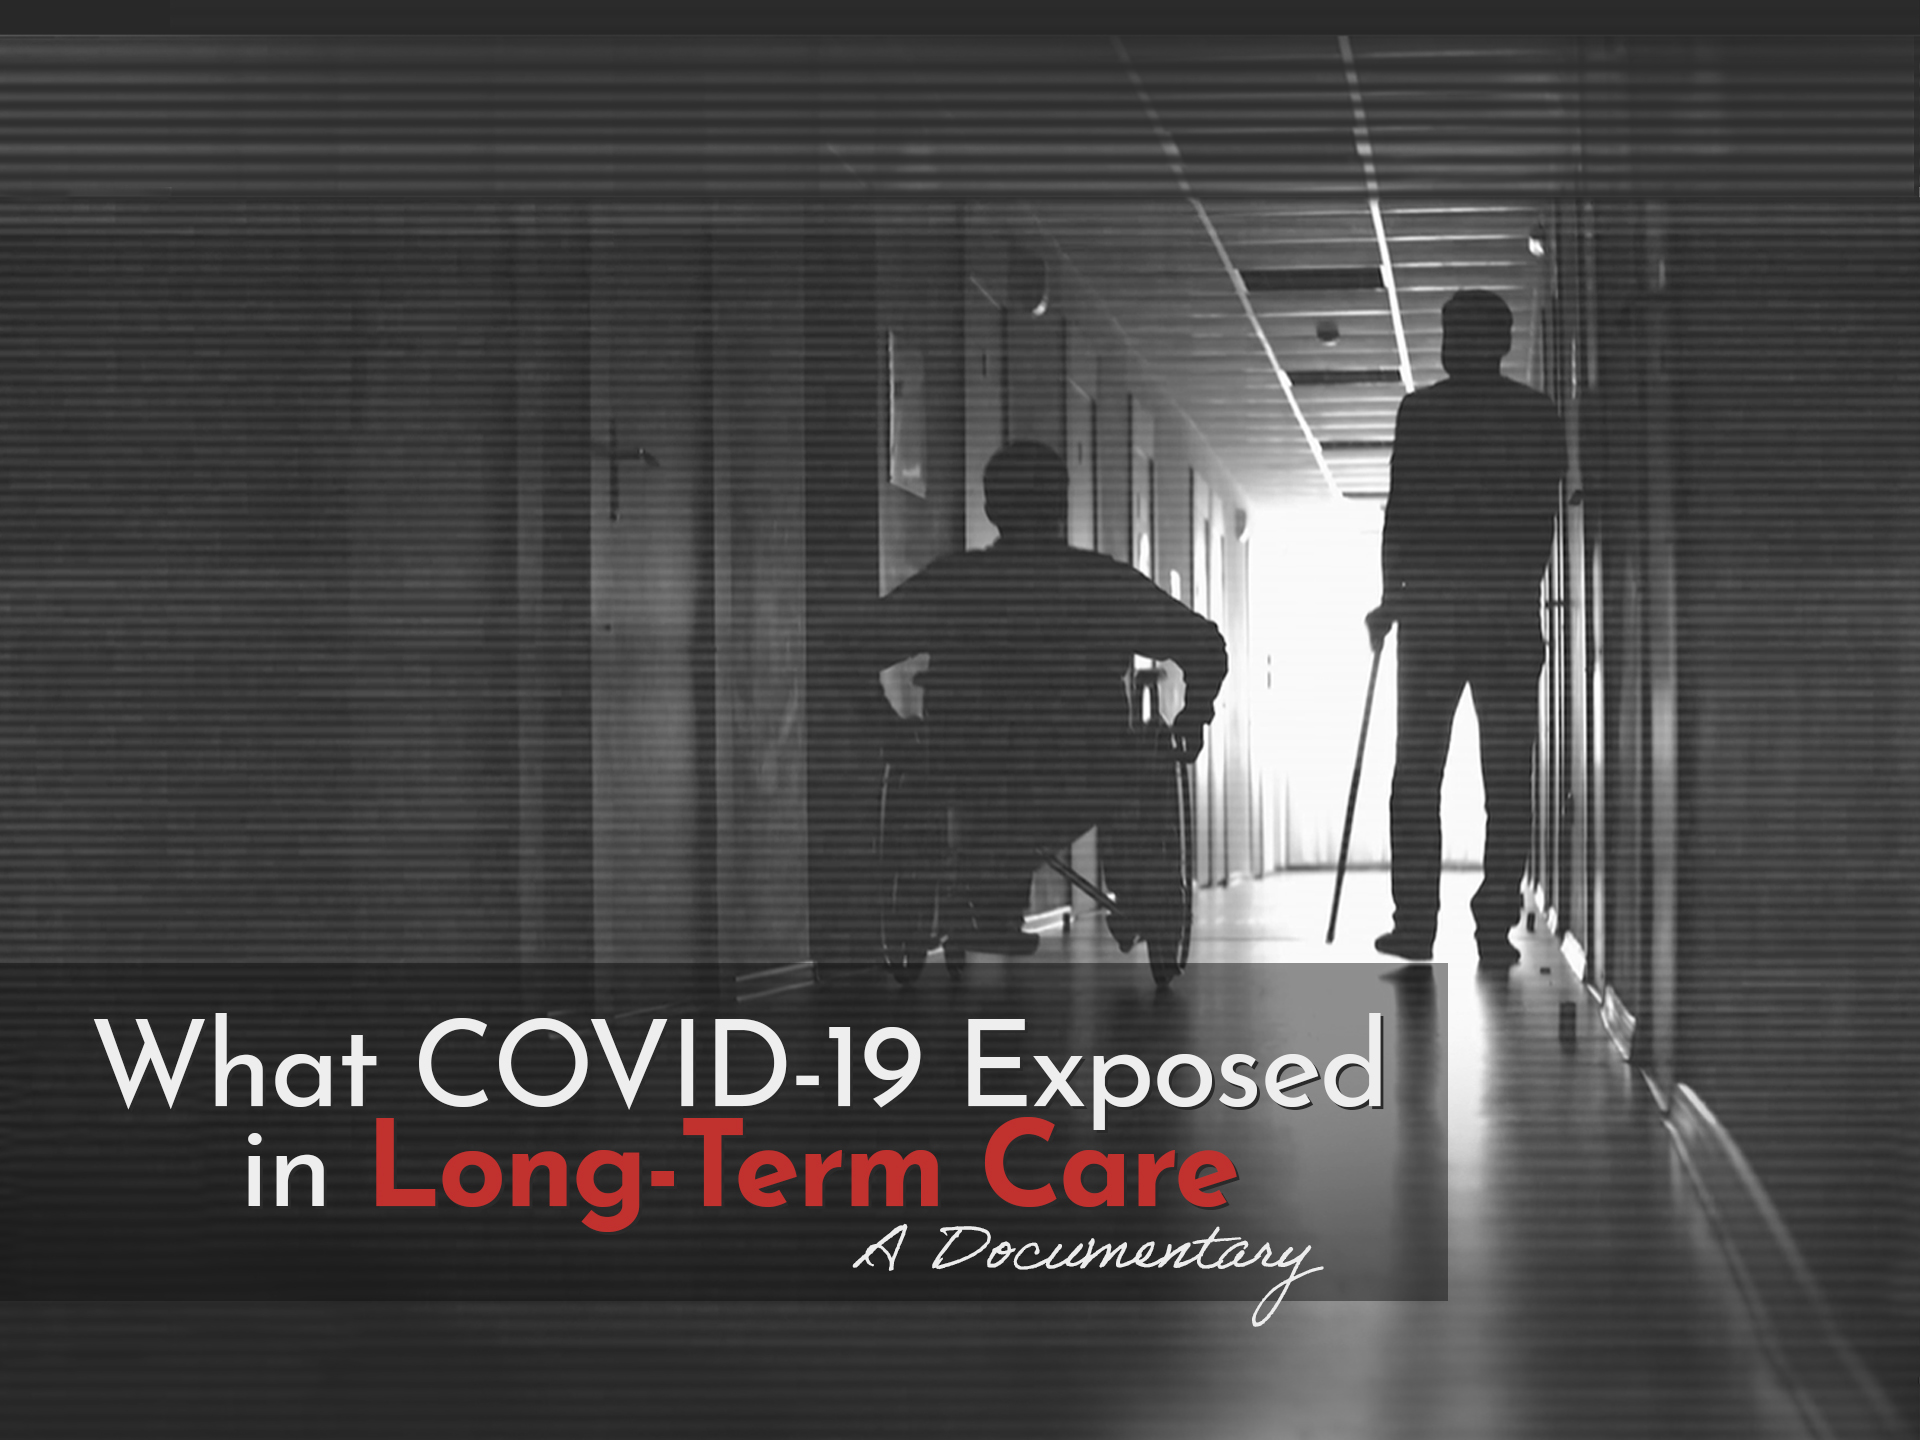 What COVID-19 Exposed in Long-Term Care